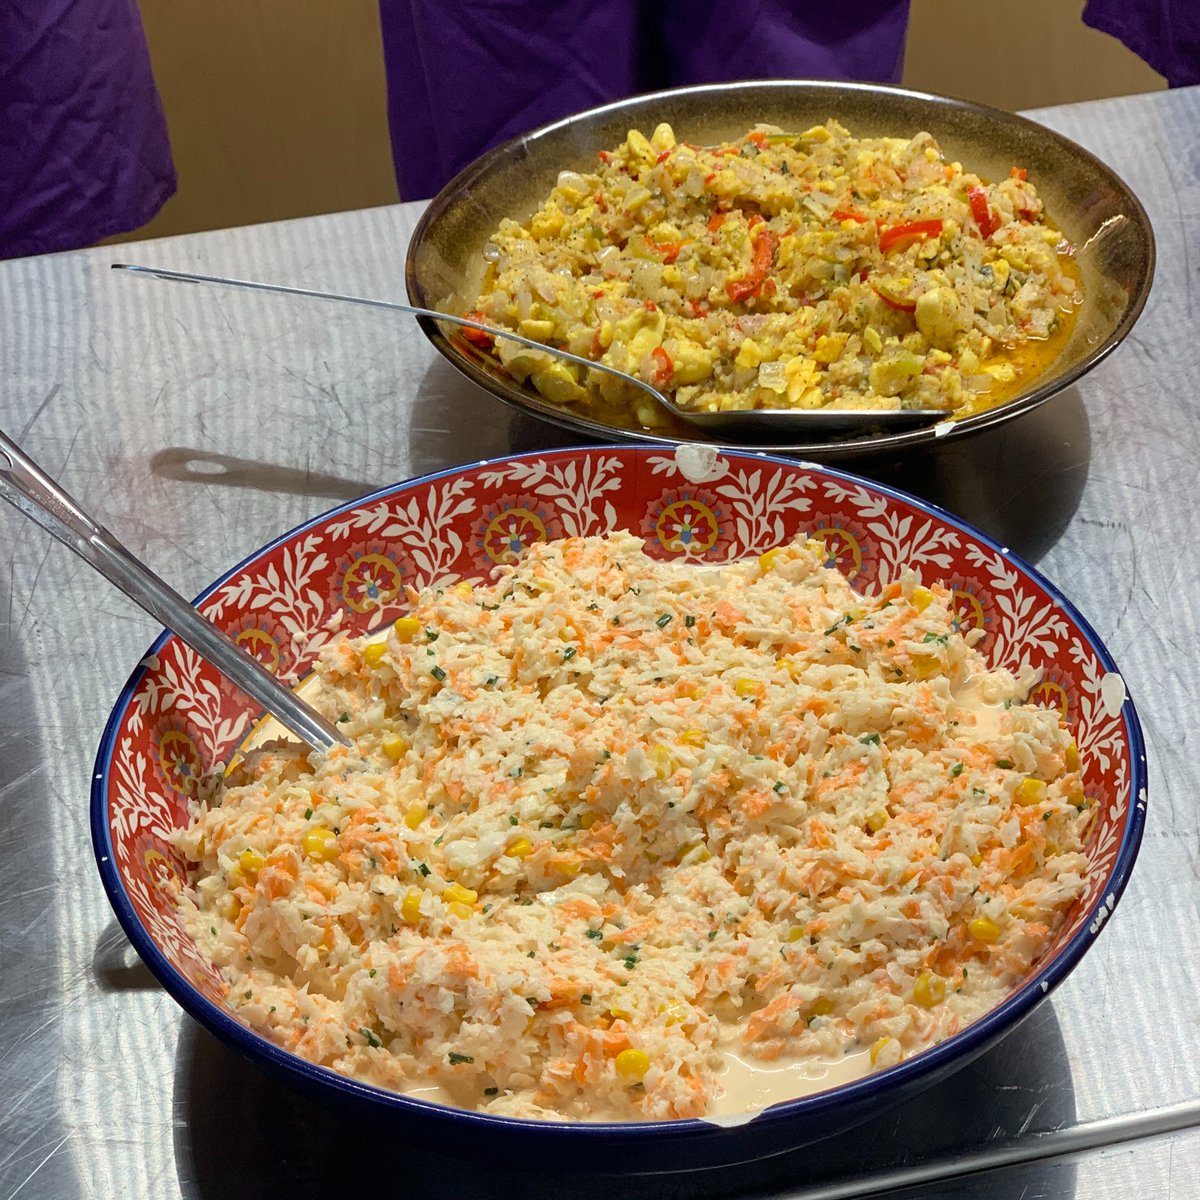 Today's #FoodieFriday is Tamika's coleslaw (📸 with Ackee and Saltfish)! Coleslaw and fresh green salad are THE two salads served with Jamaican food. Tamika tells us, “My coleslaw was famous when I worked in a Jamaican restaurant. Everyone used to ask for Tami’s coleslaw!” 🌟